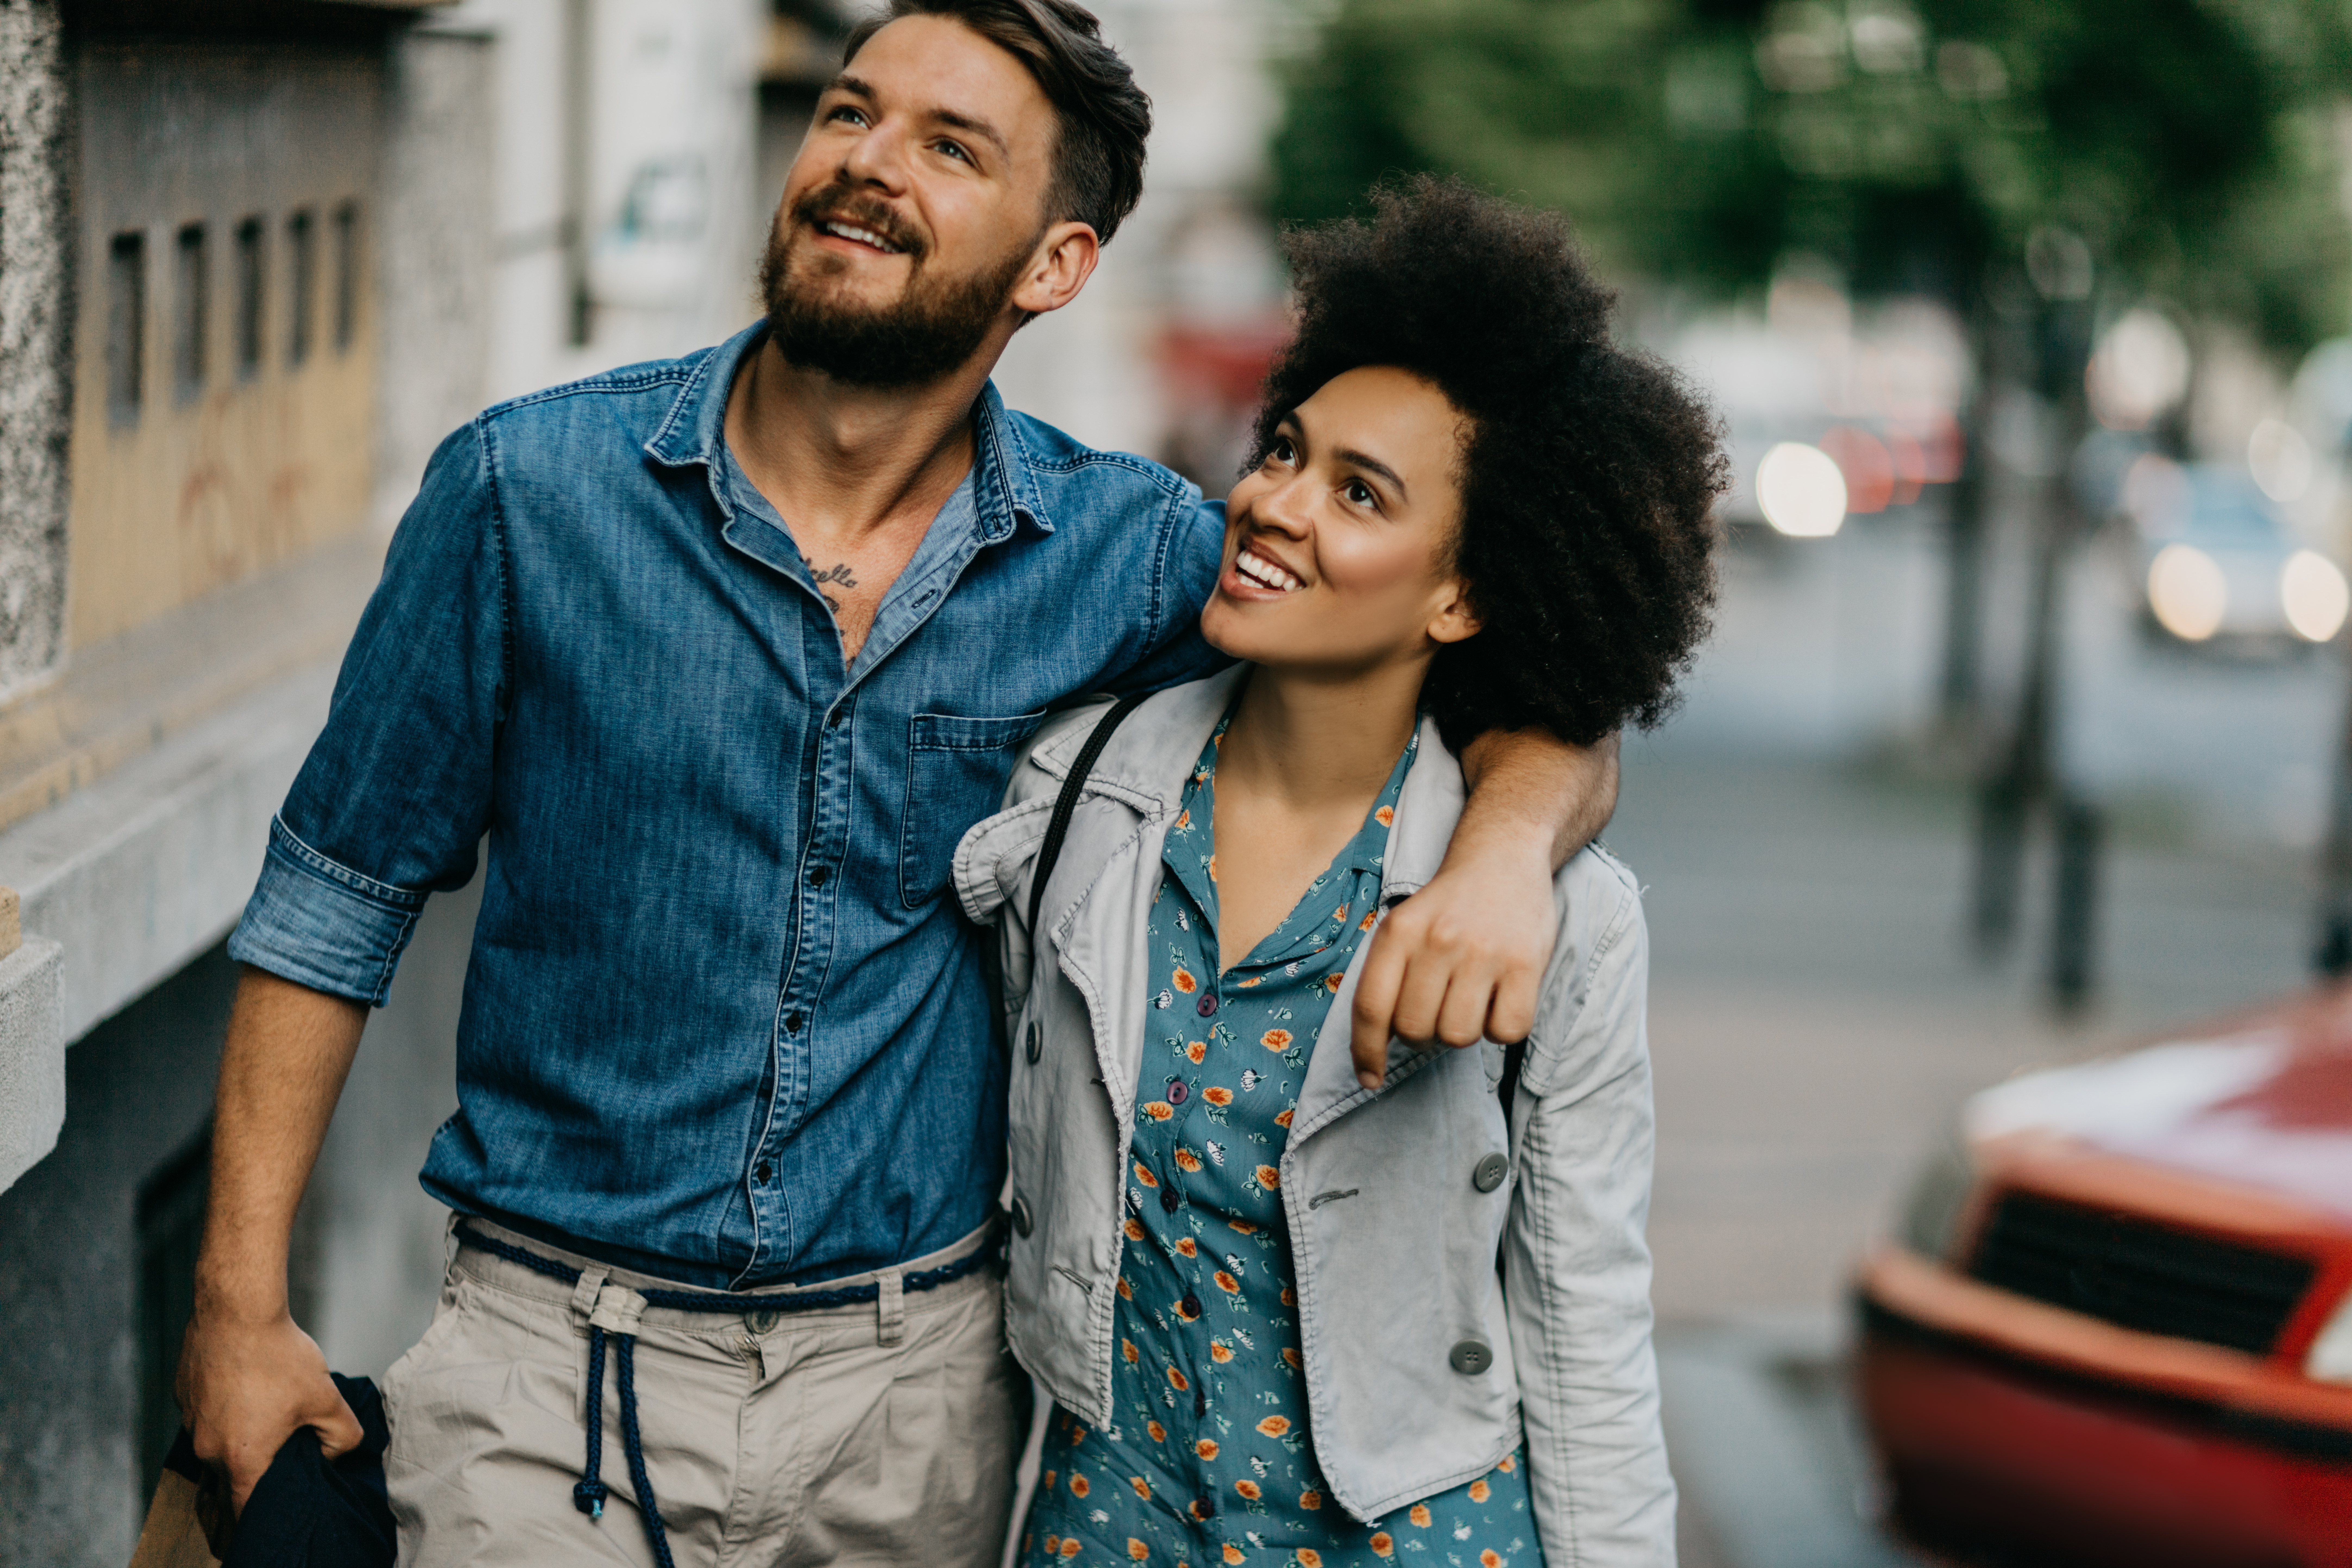 Find Love Online And Make Real Connections With Zoosk